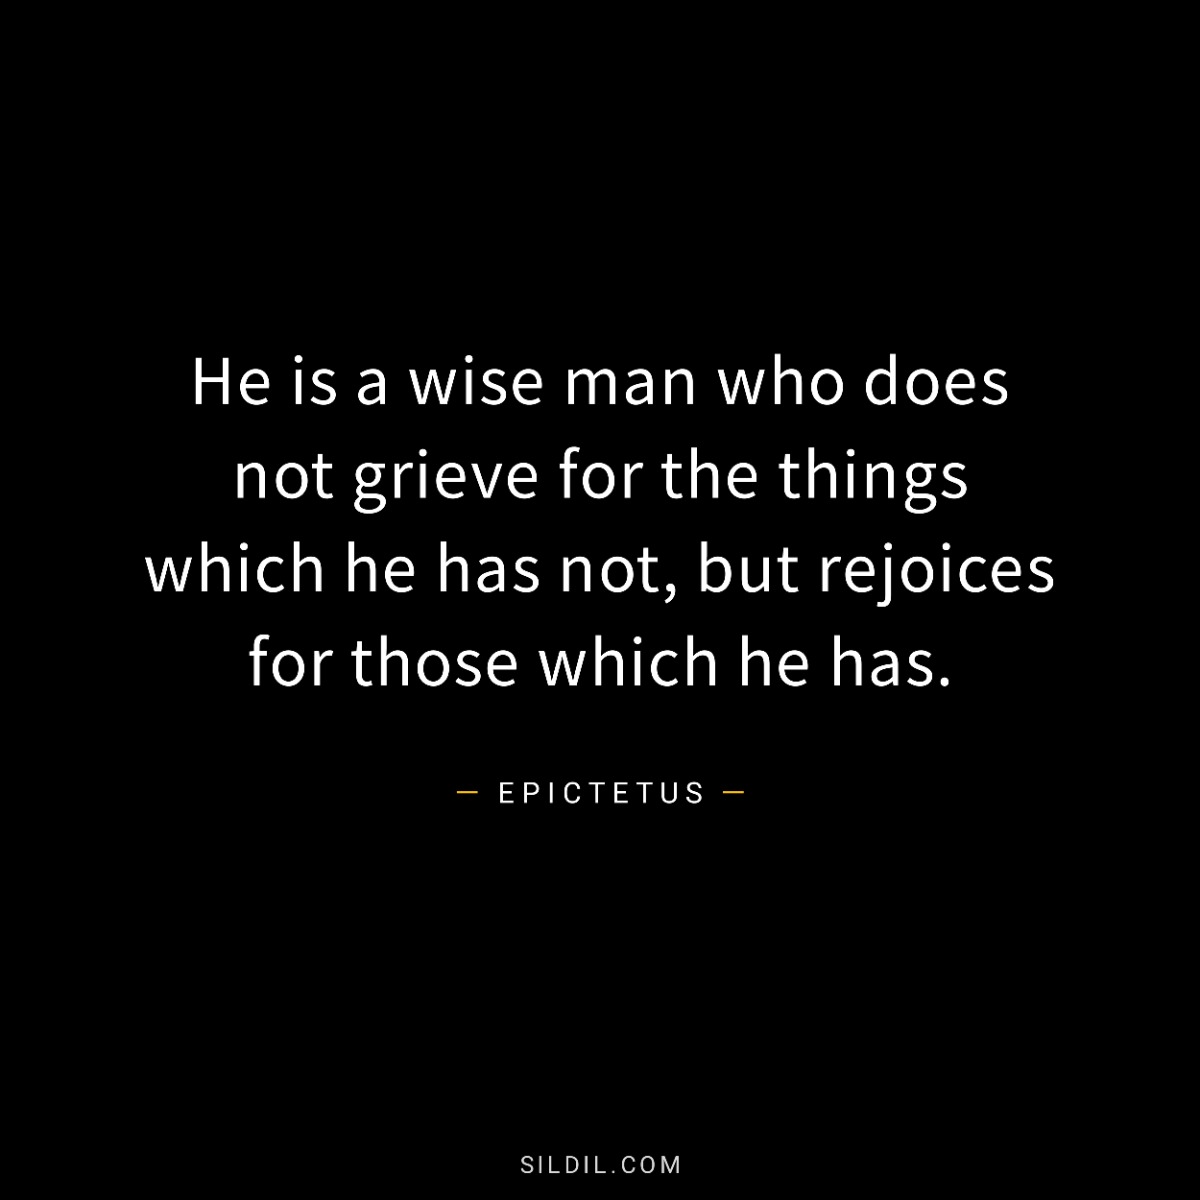 He is a wise man who does not grieve for the things which he has not, but rejoices for those which he has.